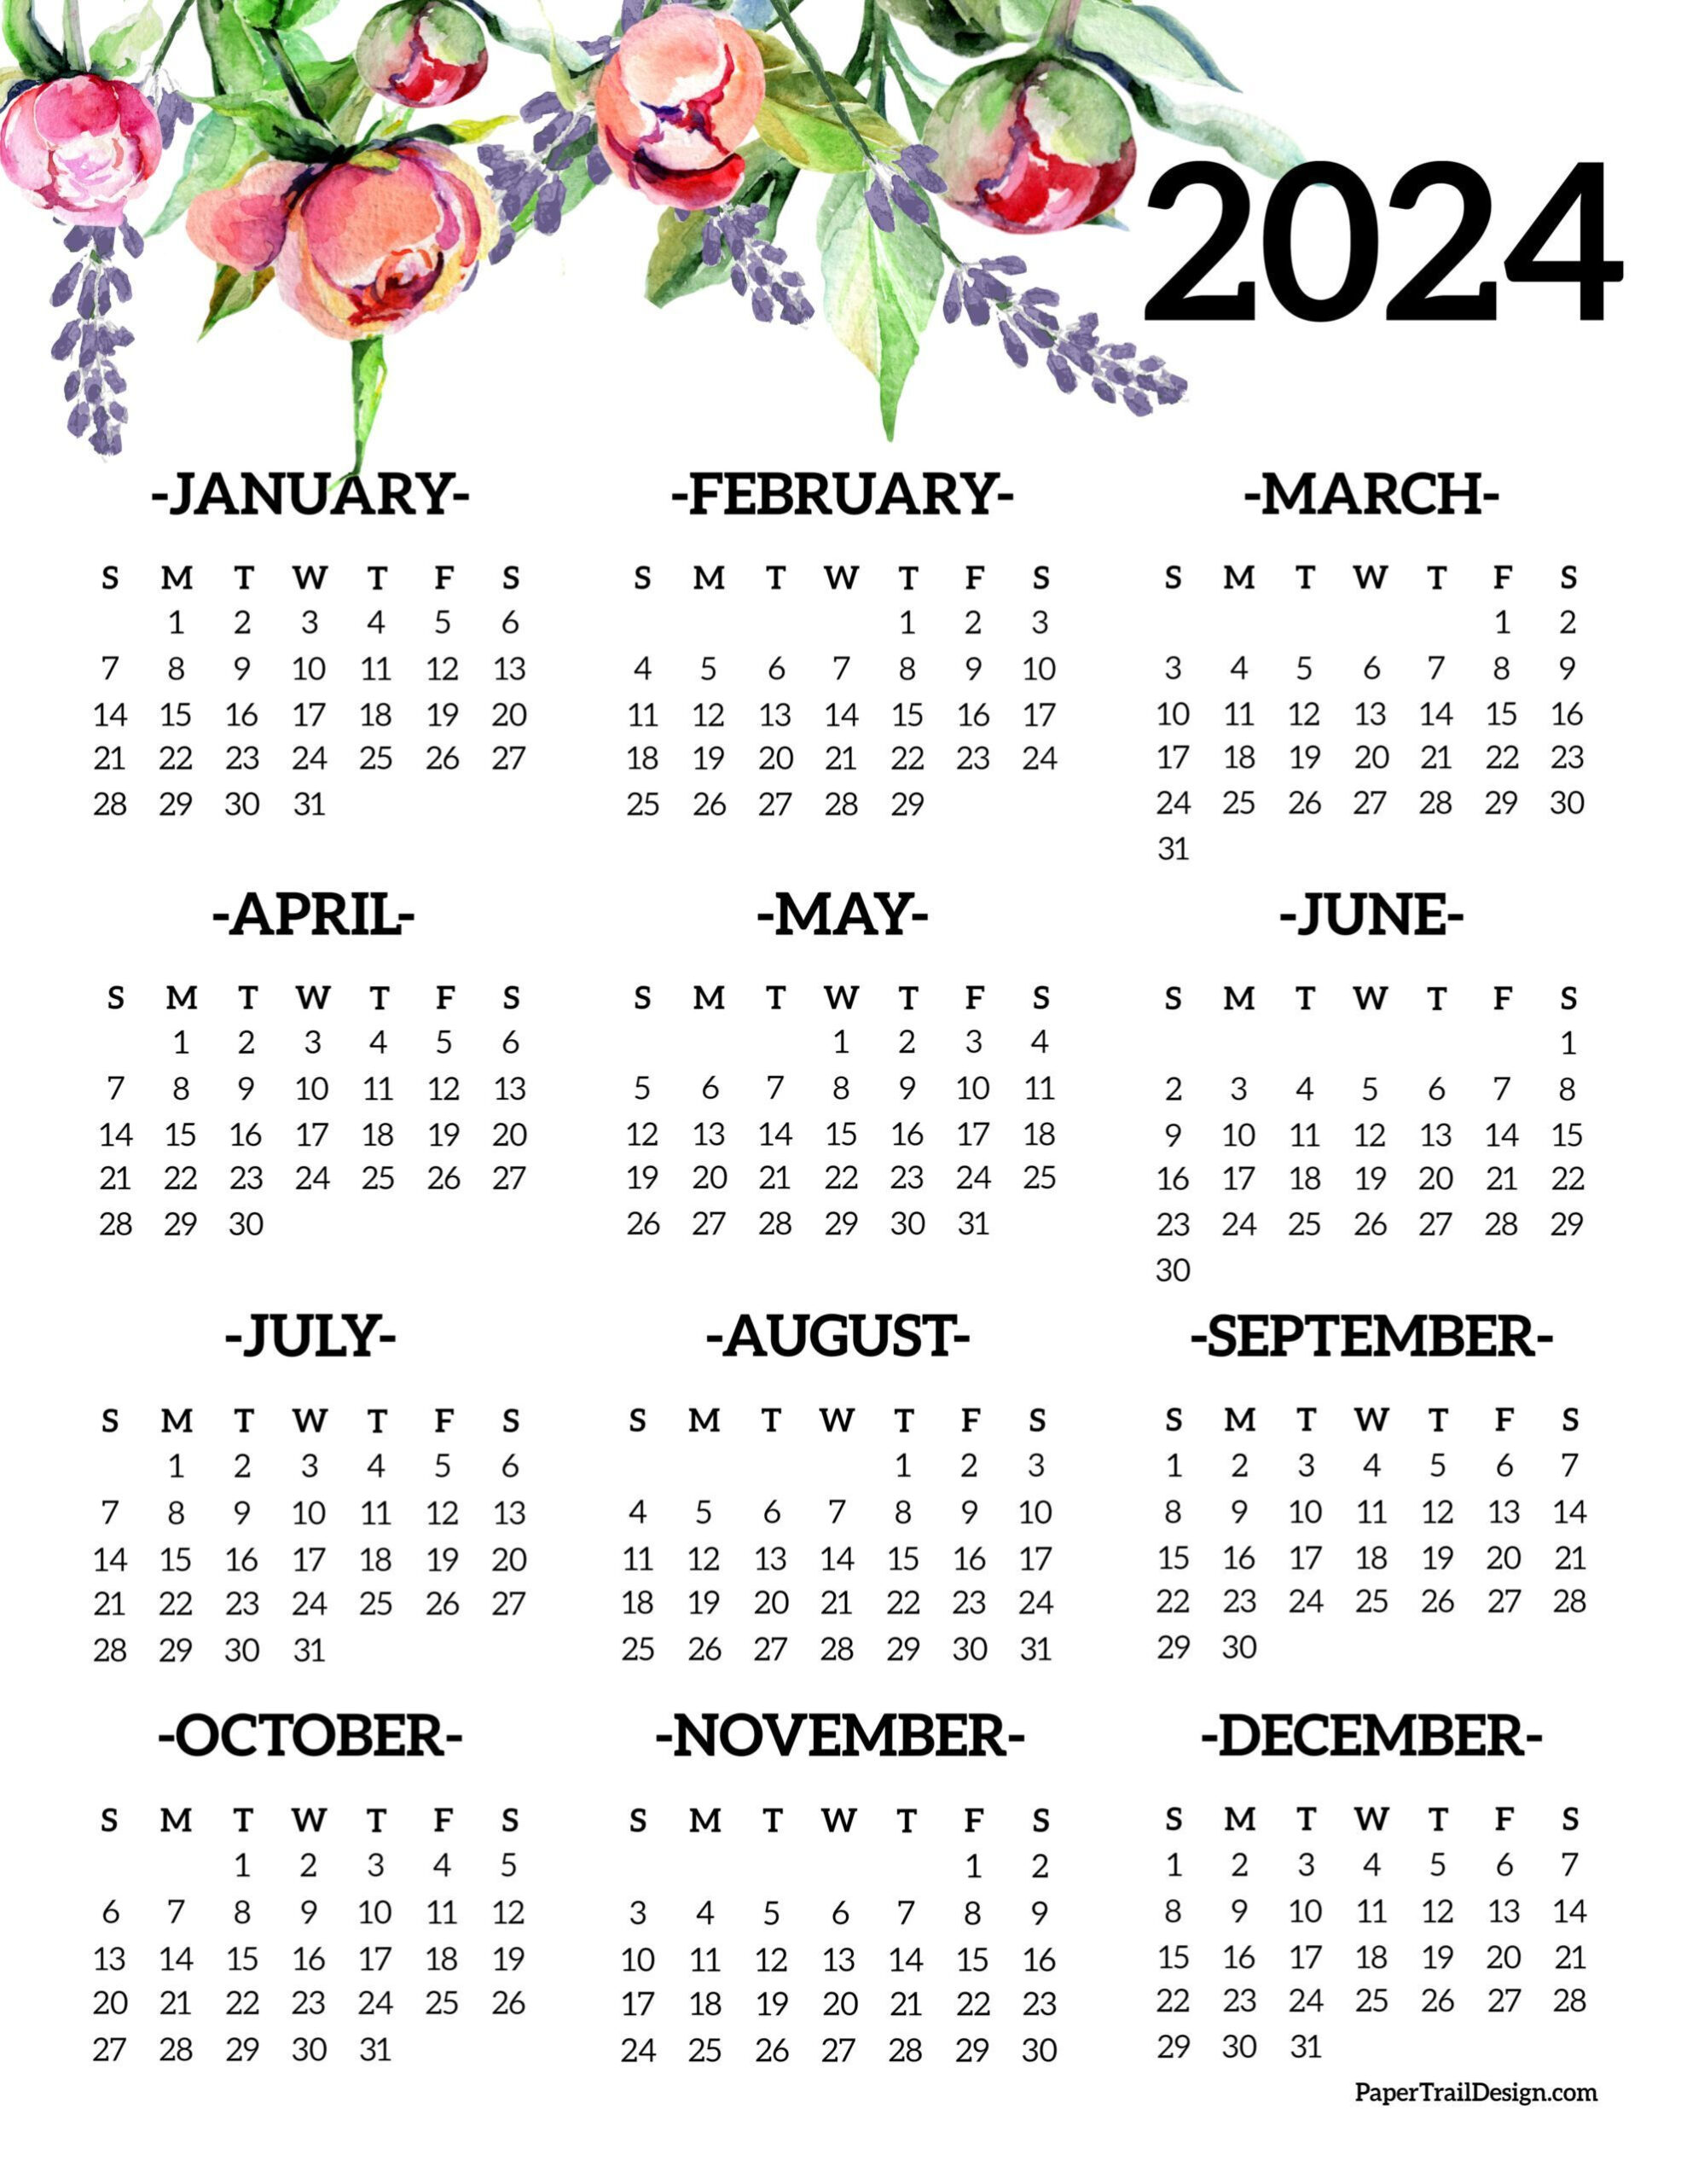 Calendar 2024 Printable One Page | Paper Trail Design In 2023 | Printable 2024 Calendar One Page